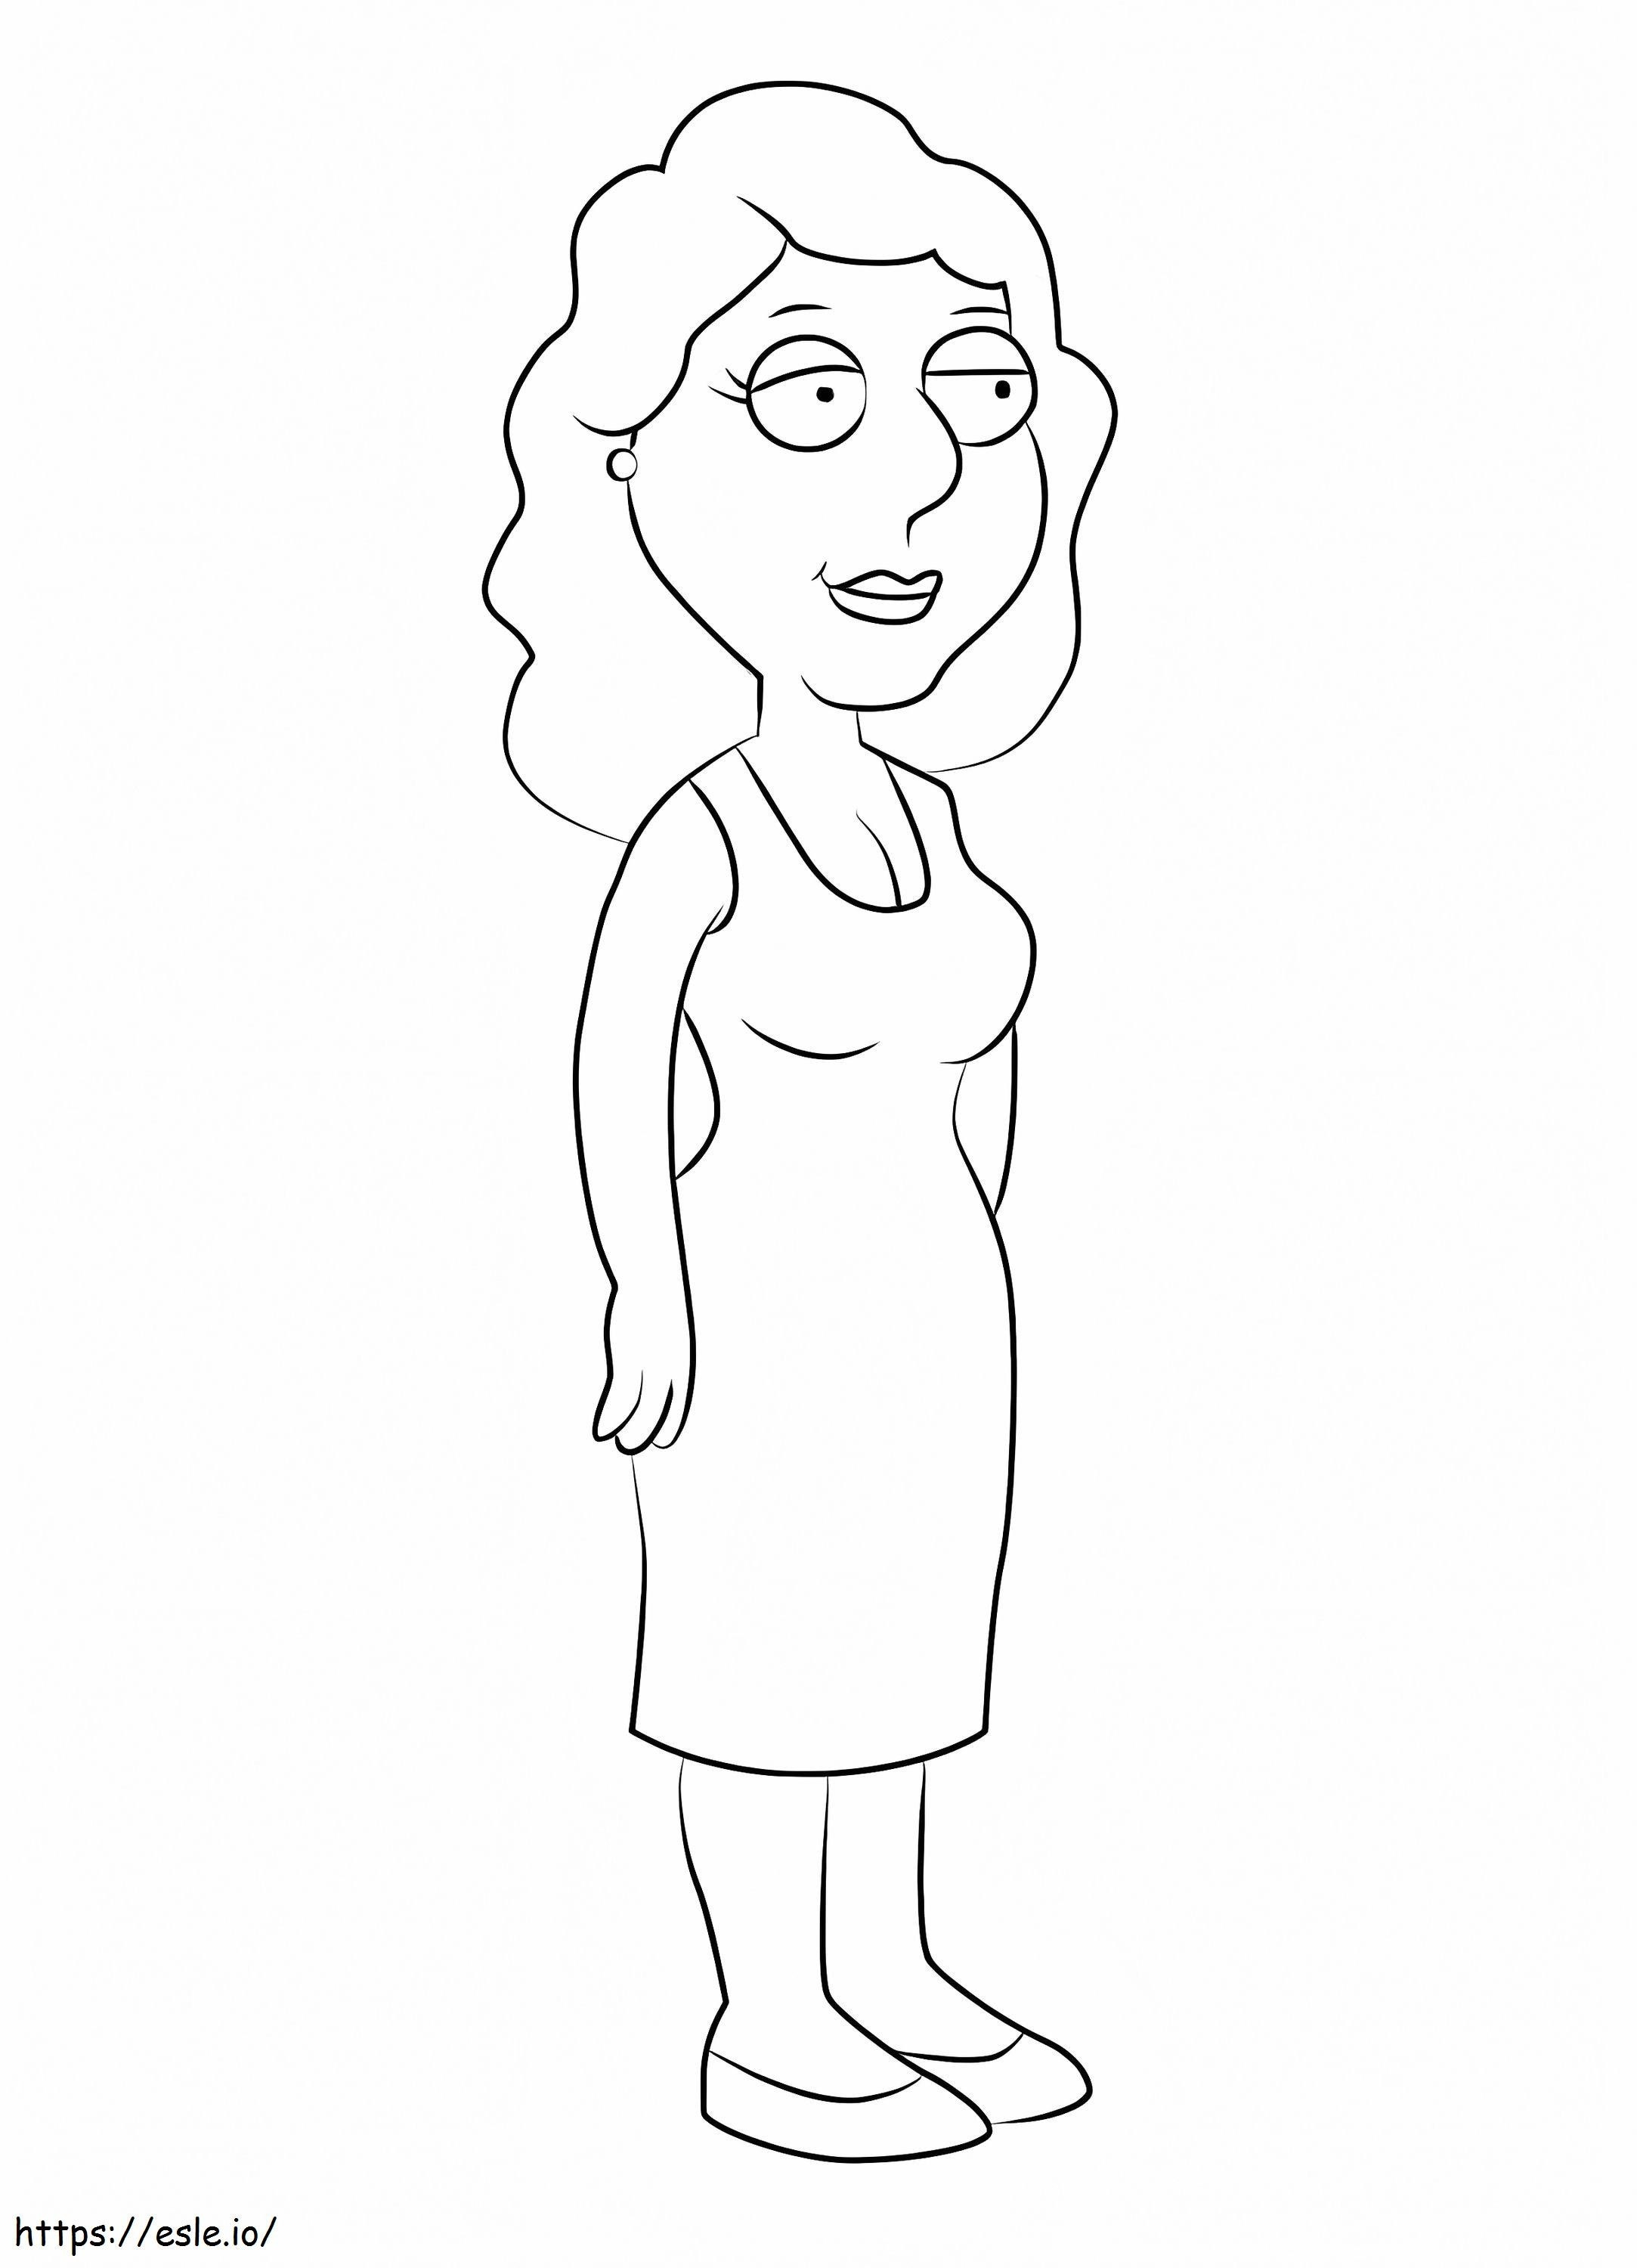 Bonnie Swanson Family Guy coloring page